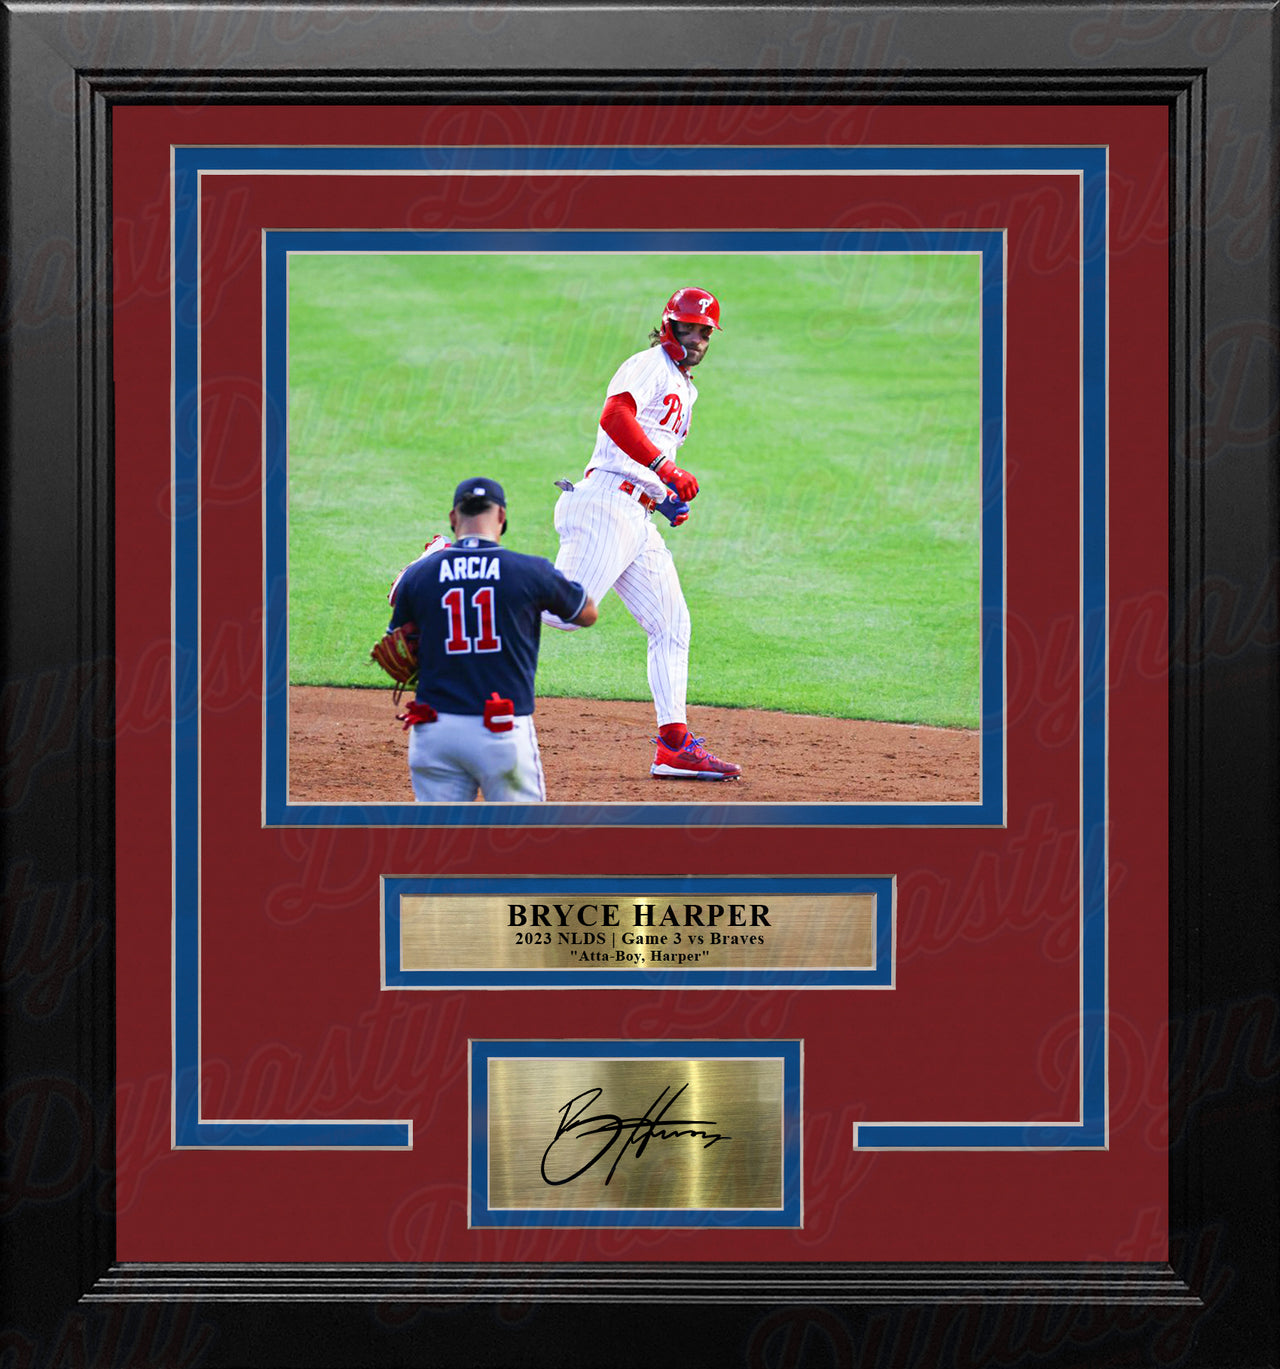 Bryce Harper Stares Down Arcia Philadelphia Phillies 8x10 Framed Photo with Engraved Autograph